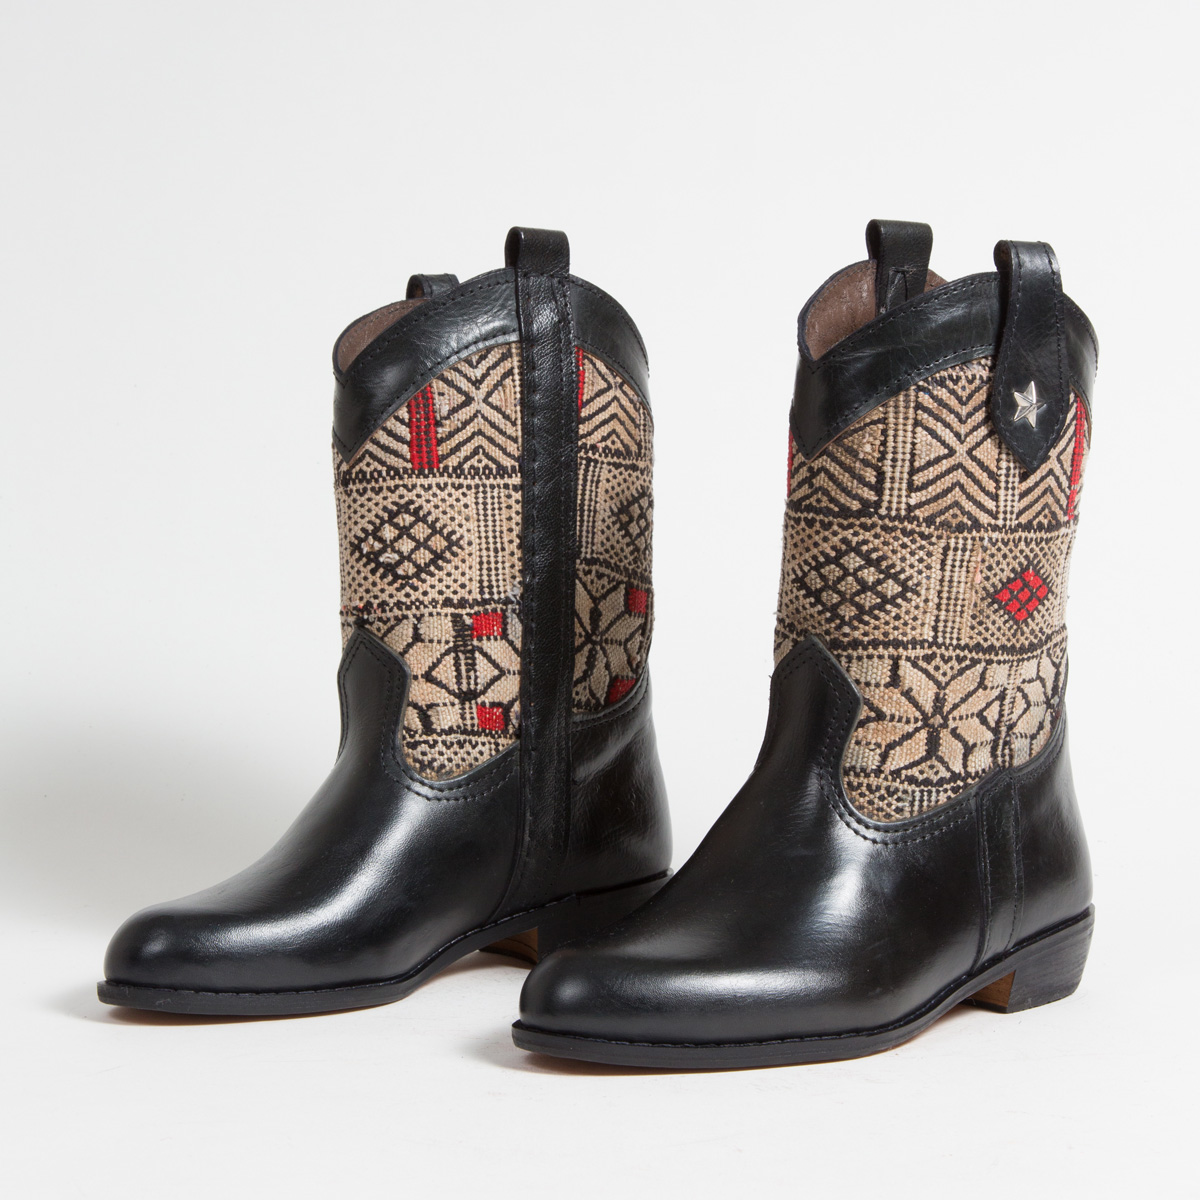 Bottines Kilim cuir mababouche artisanales (Réf. MN3-37)